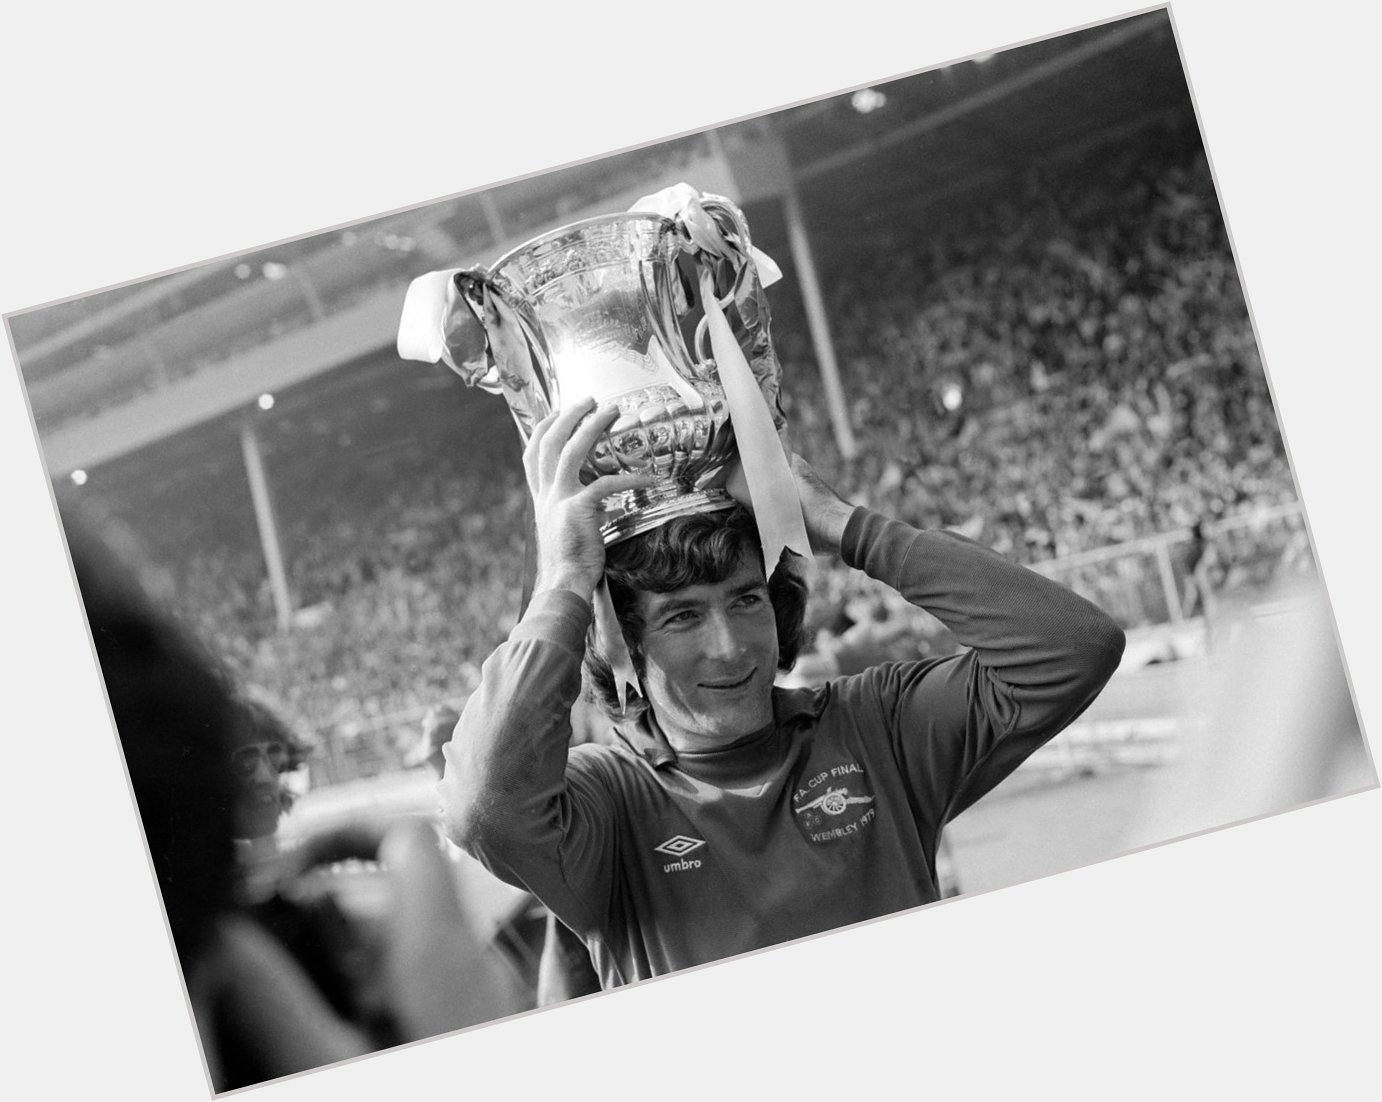  327 appearances 107 clean sheets

Happy 76th birthday to Pat Jennings 